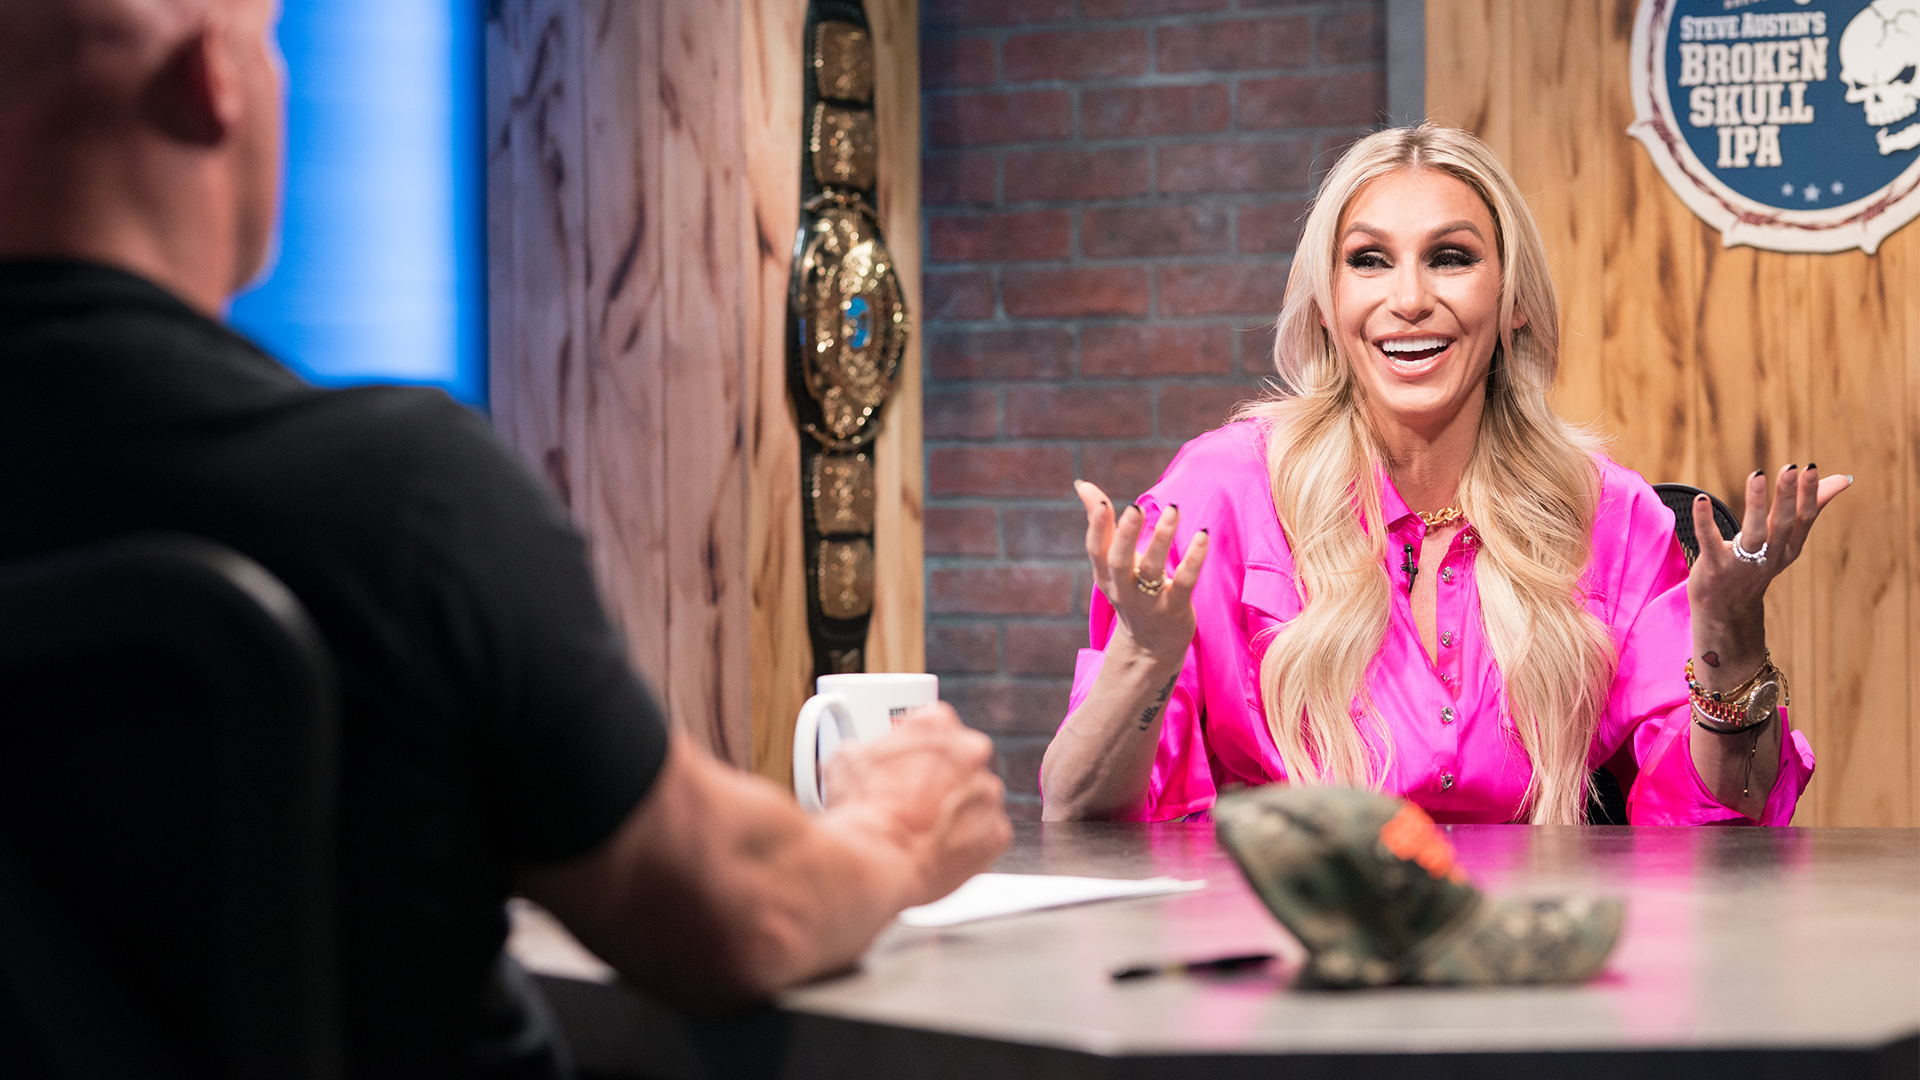 Charlotte Flair tries to beat the clock in “30-Second Shot Clock” Broken Skull Sessions extra